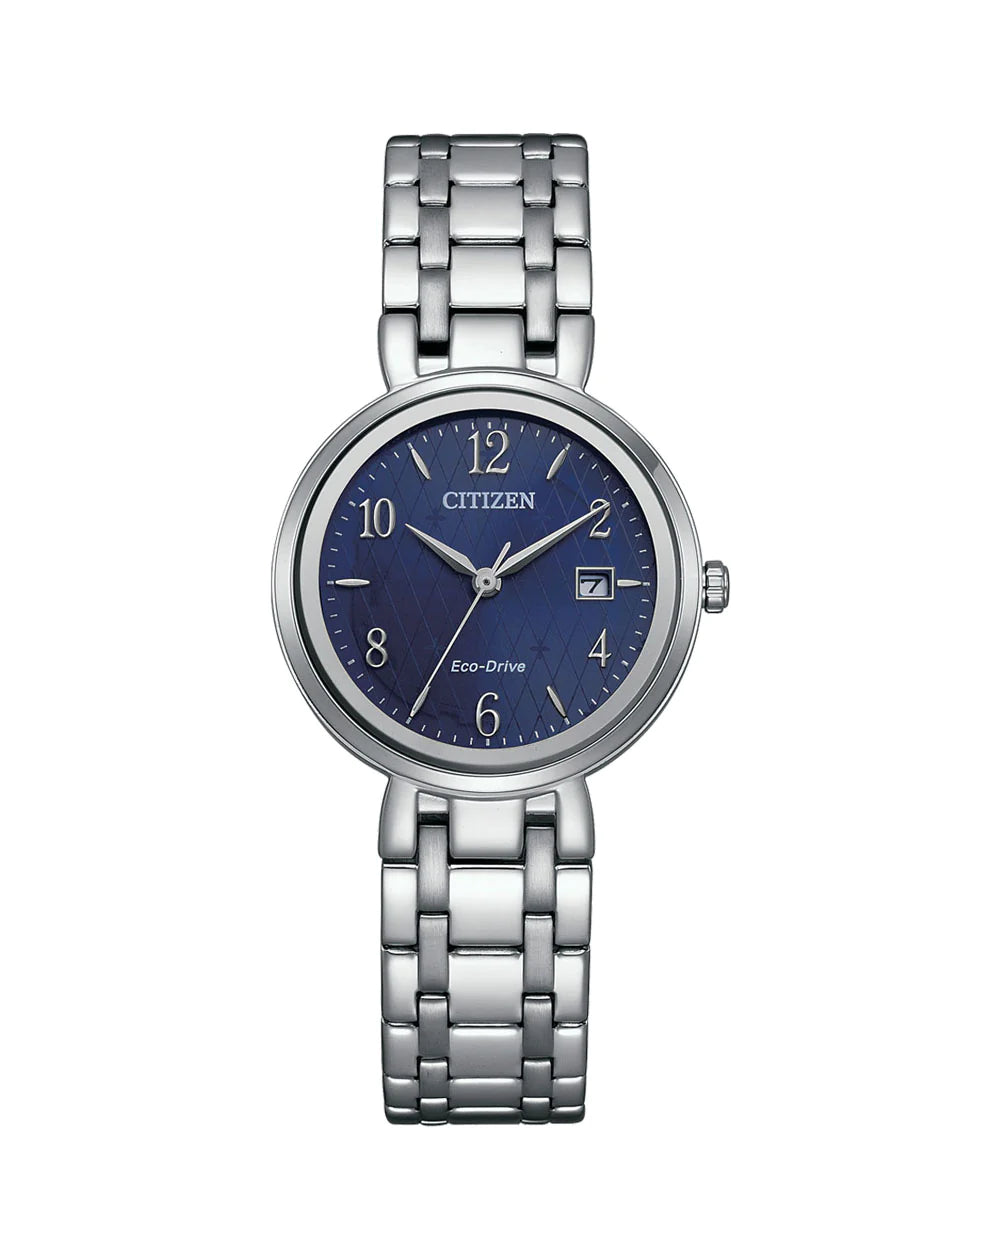 Ladies Citizen Eco-Drive Watch with Blue Dial